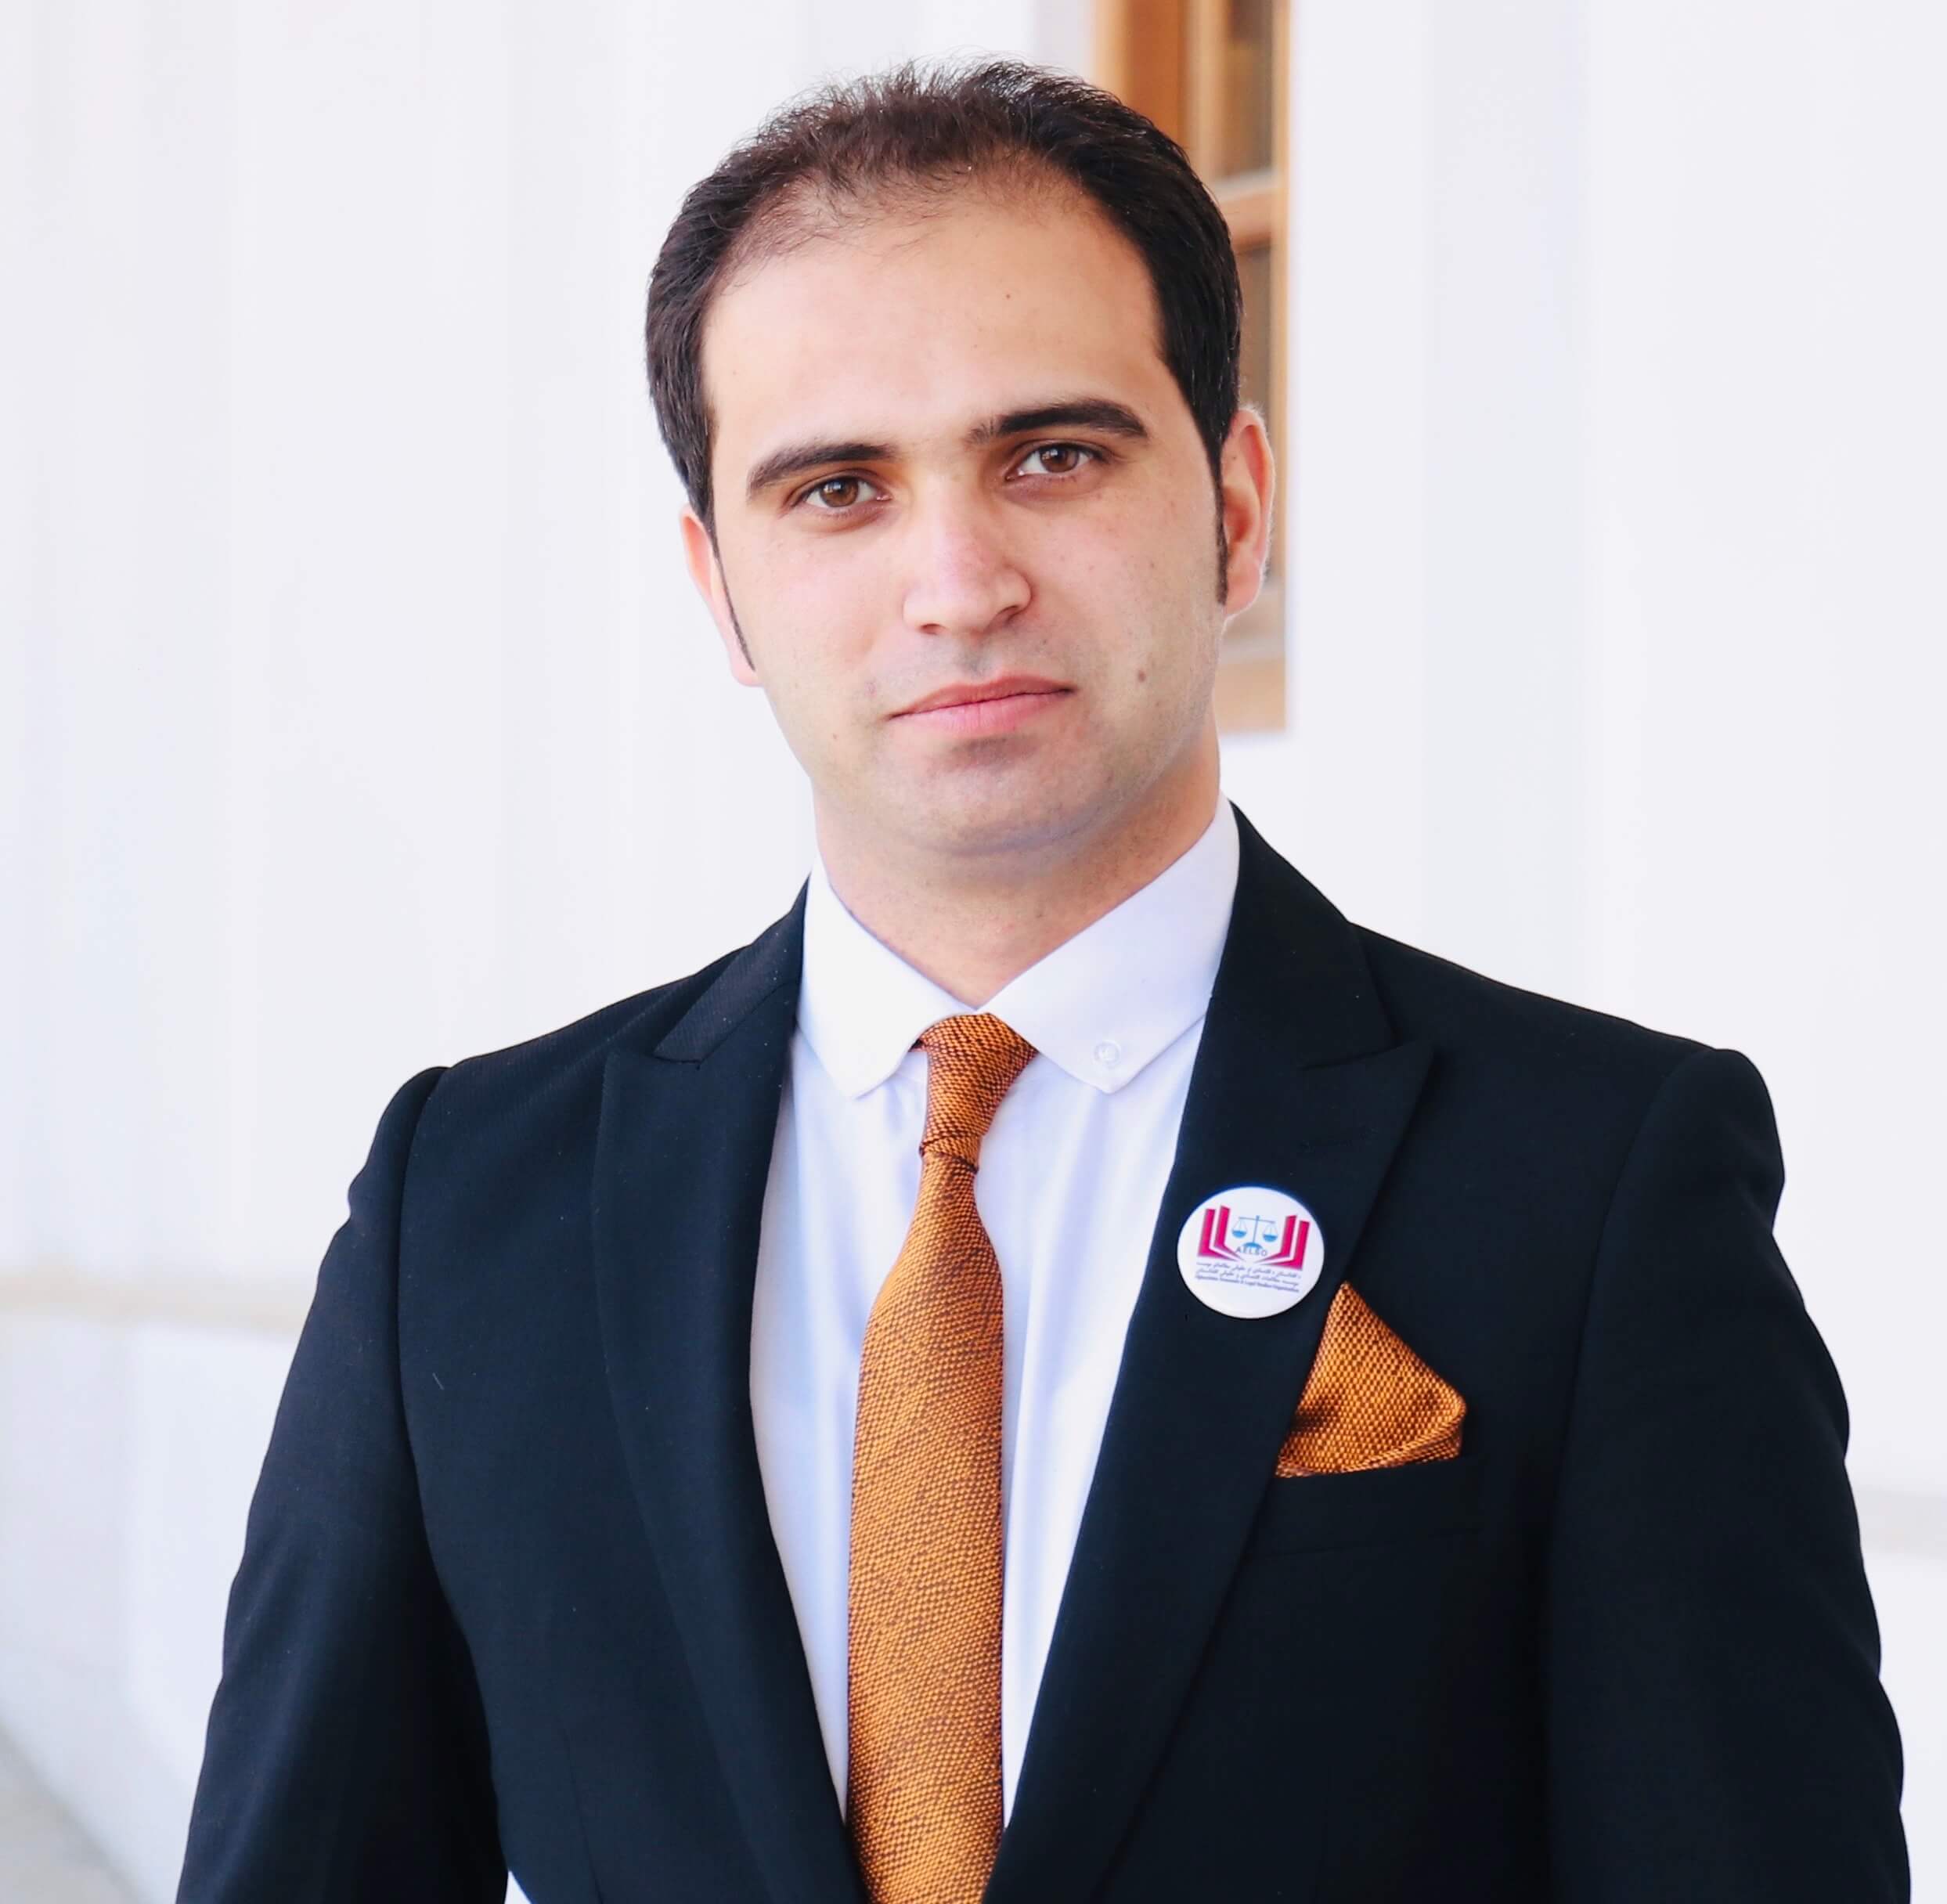 M. Khalid Ramizy, CEO of AELSO